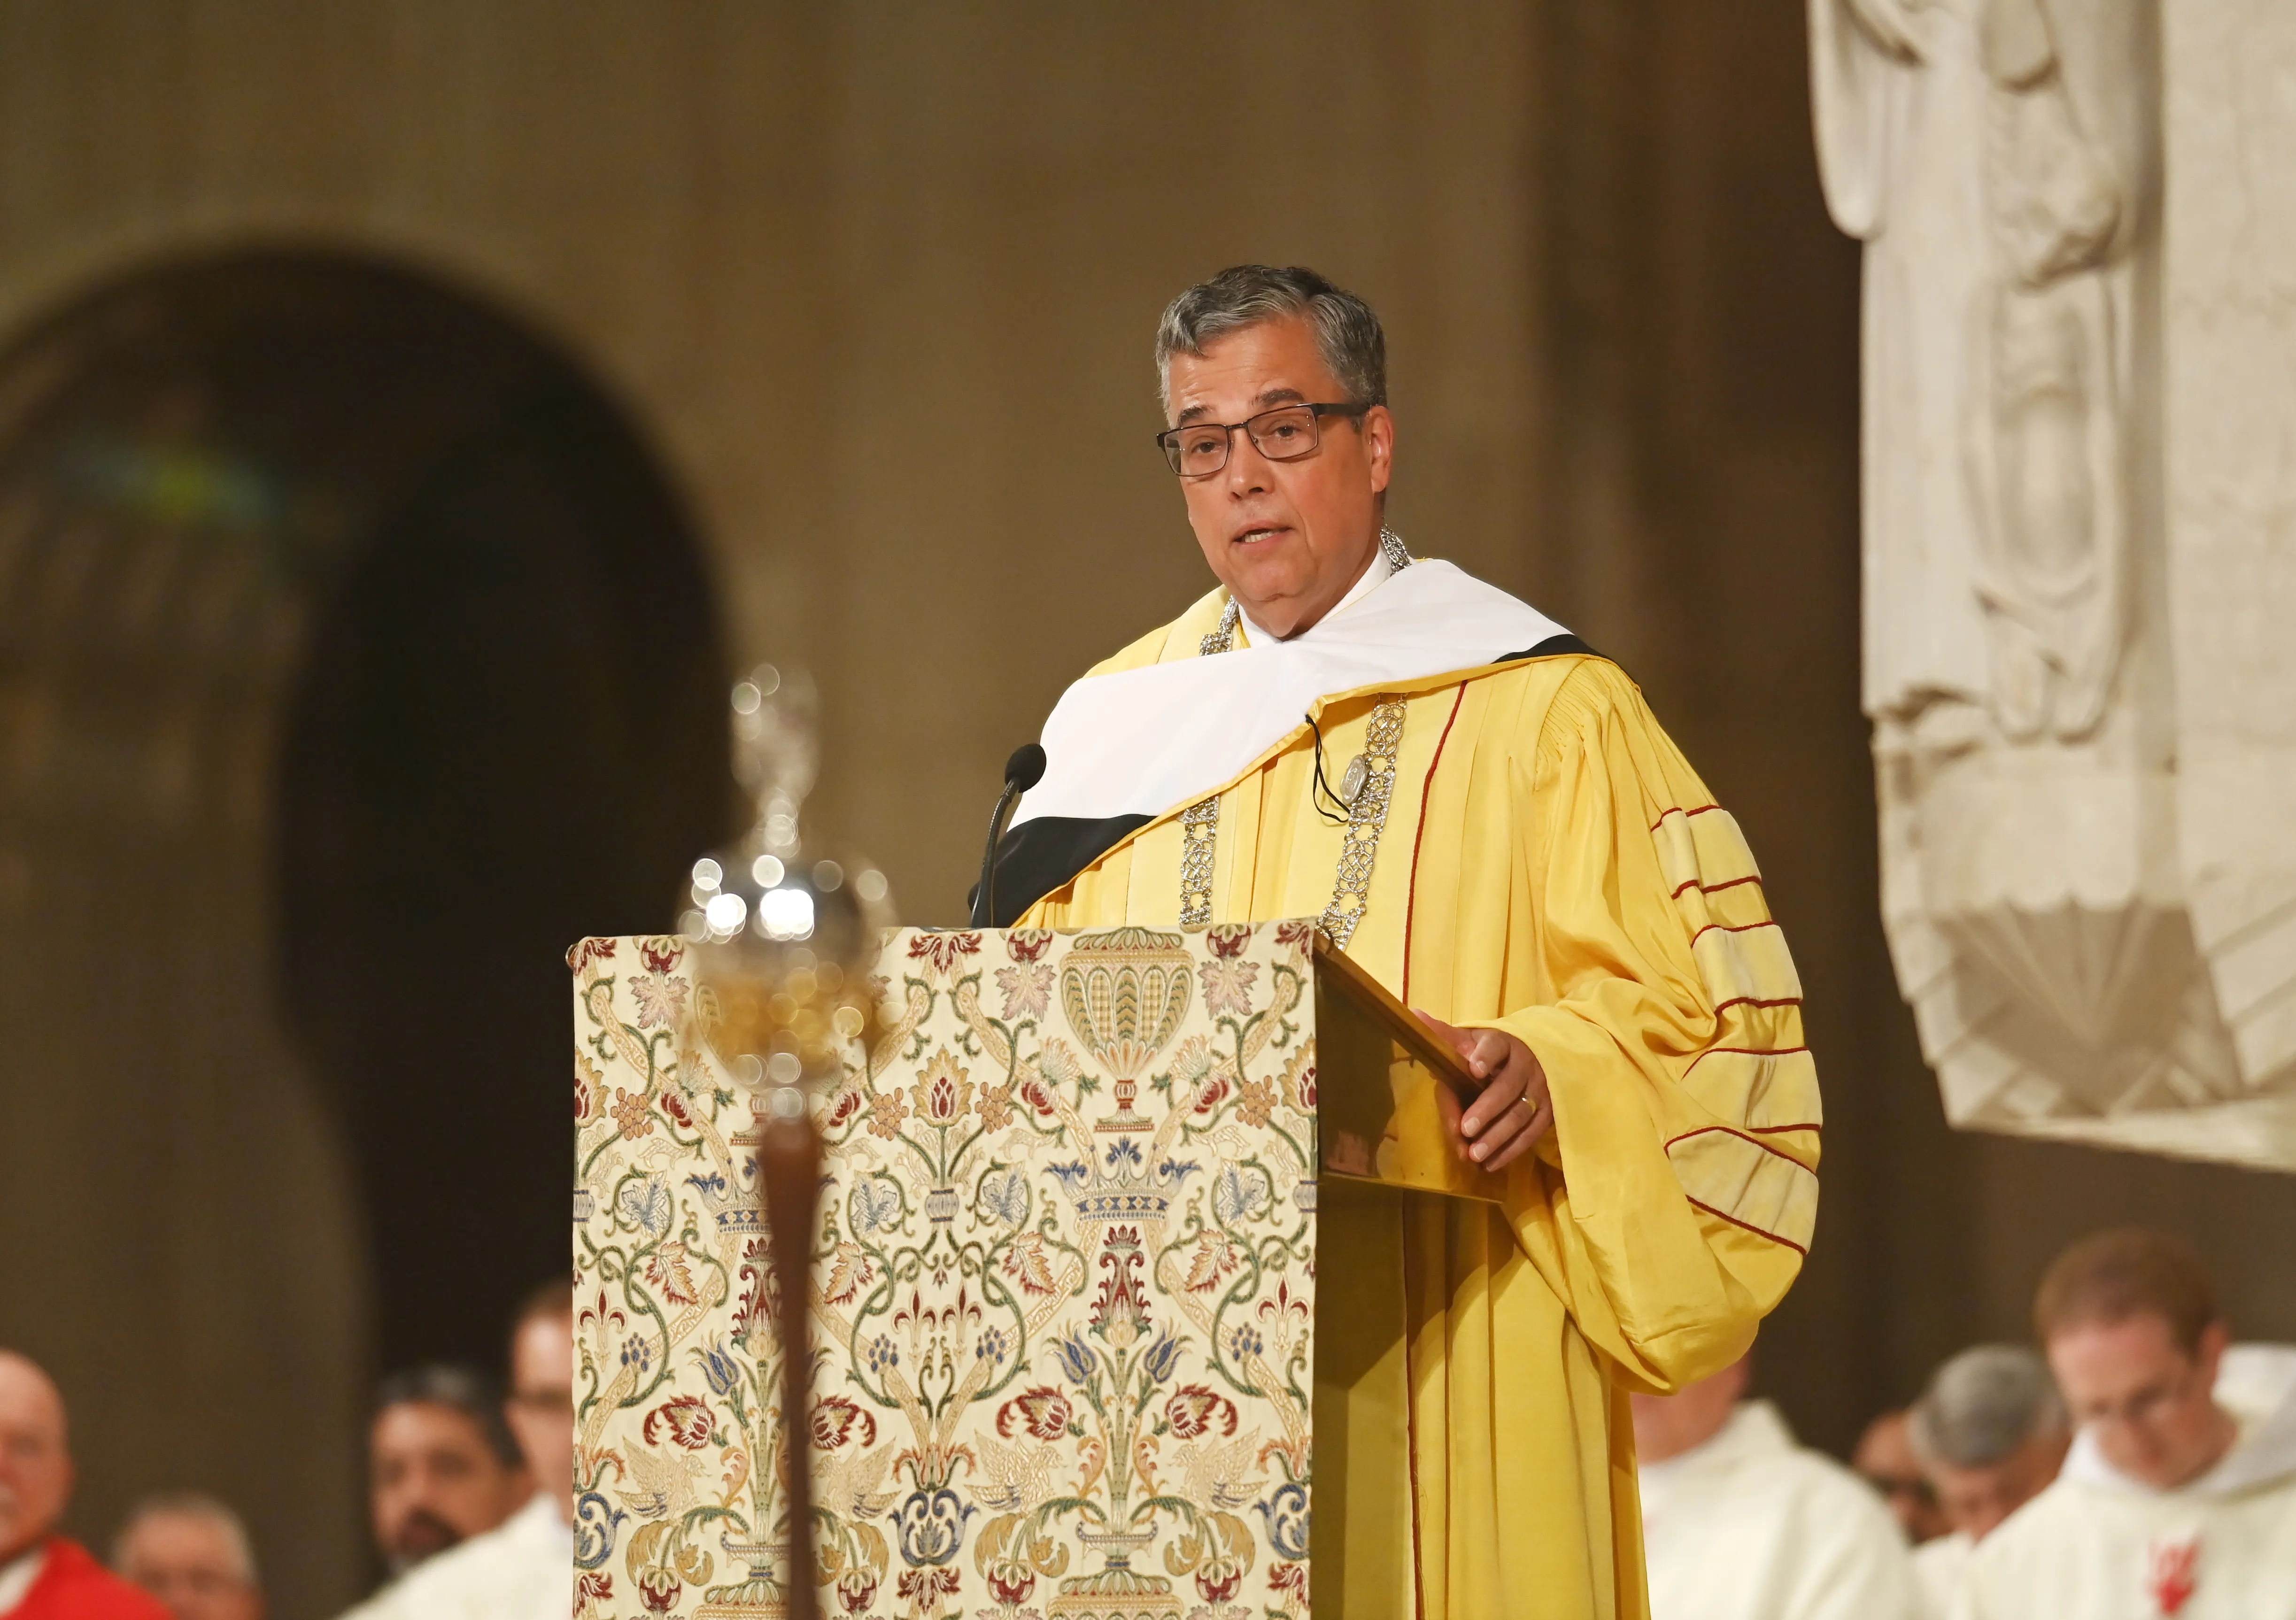 Peter Kilpatrick, the new president of The Catholic University of America, addresses students, staff, and faculty at the Mass of the Holy Spirit on Sept. 1, 2022, at the Basilica of the National Shrine of the Immaculate Conception in Washington, D.C.?w=200&h=150